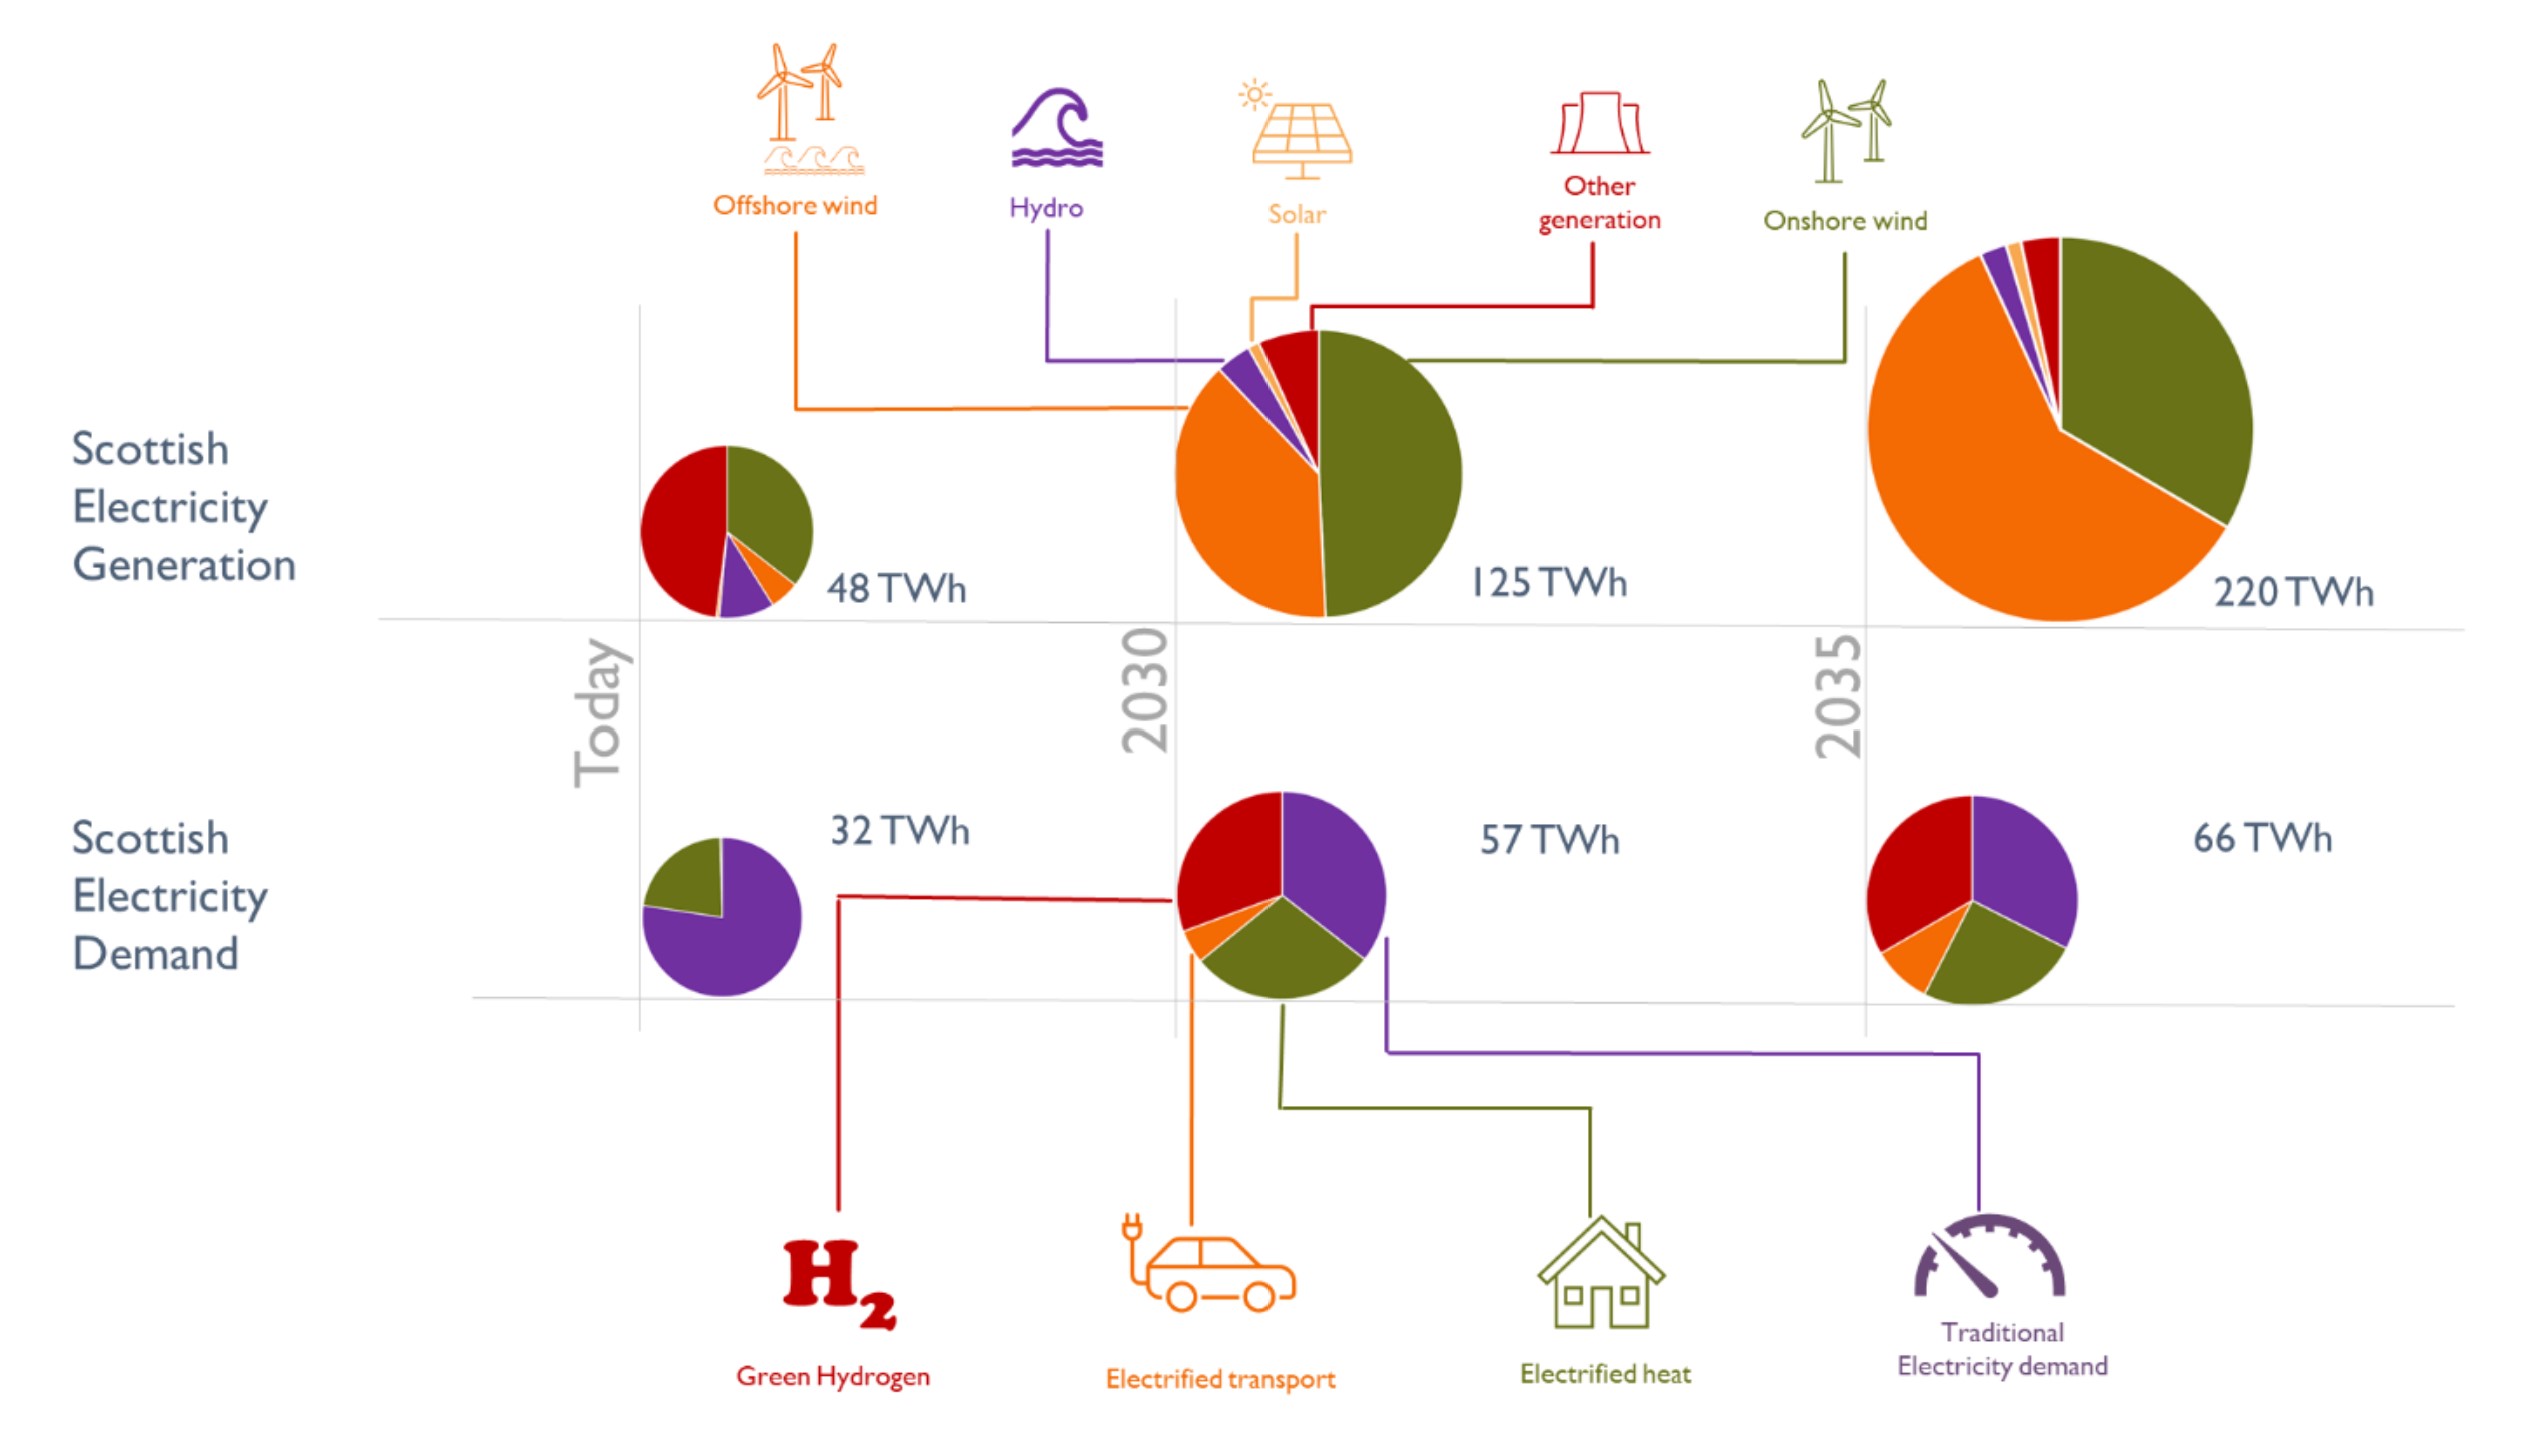 Figure 2: Illustration of annual electricity generation and demand in Scotland out to 2035. Values for today are based on current statistics, 2030 values are consistent with Scotland’s declared ambitions (e.g. for the level of heat decarbonisation) and 2035 is broadly consistent with FES 2022 and the Scottish whole energy system scenarios. Source: Scottish Futures Trust 